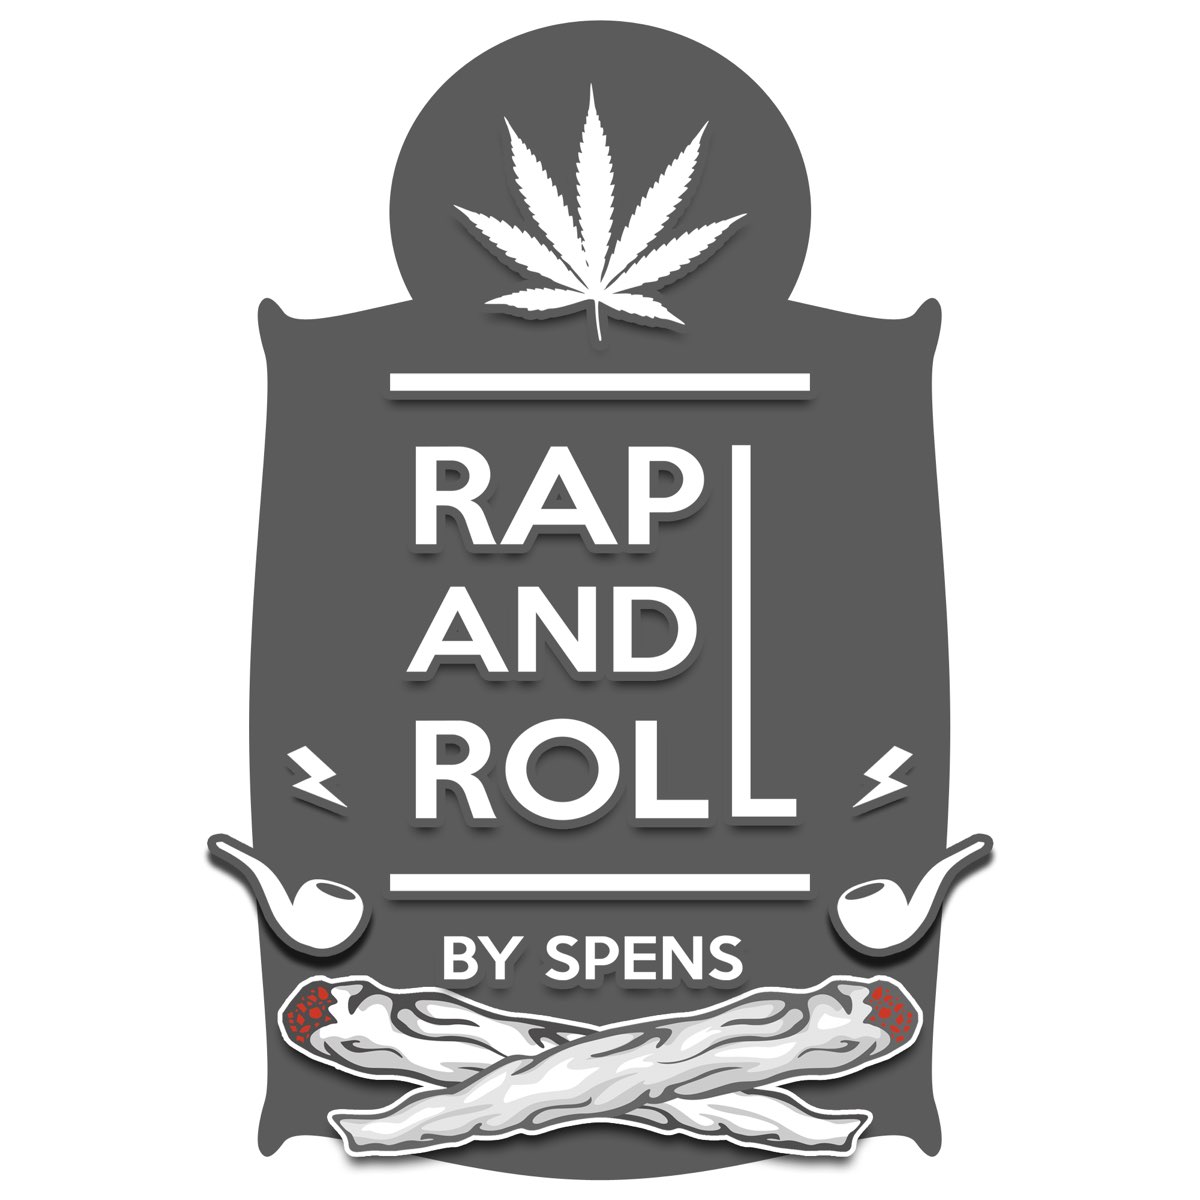 Rap and Roll - Single by Spens on Apple Music